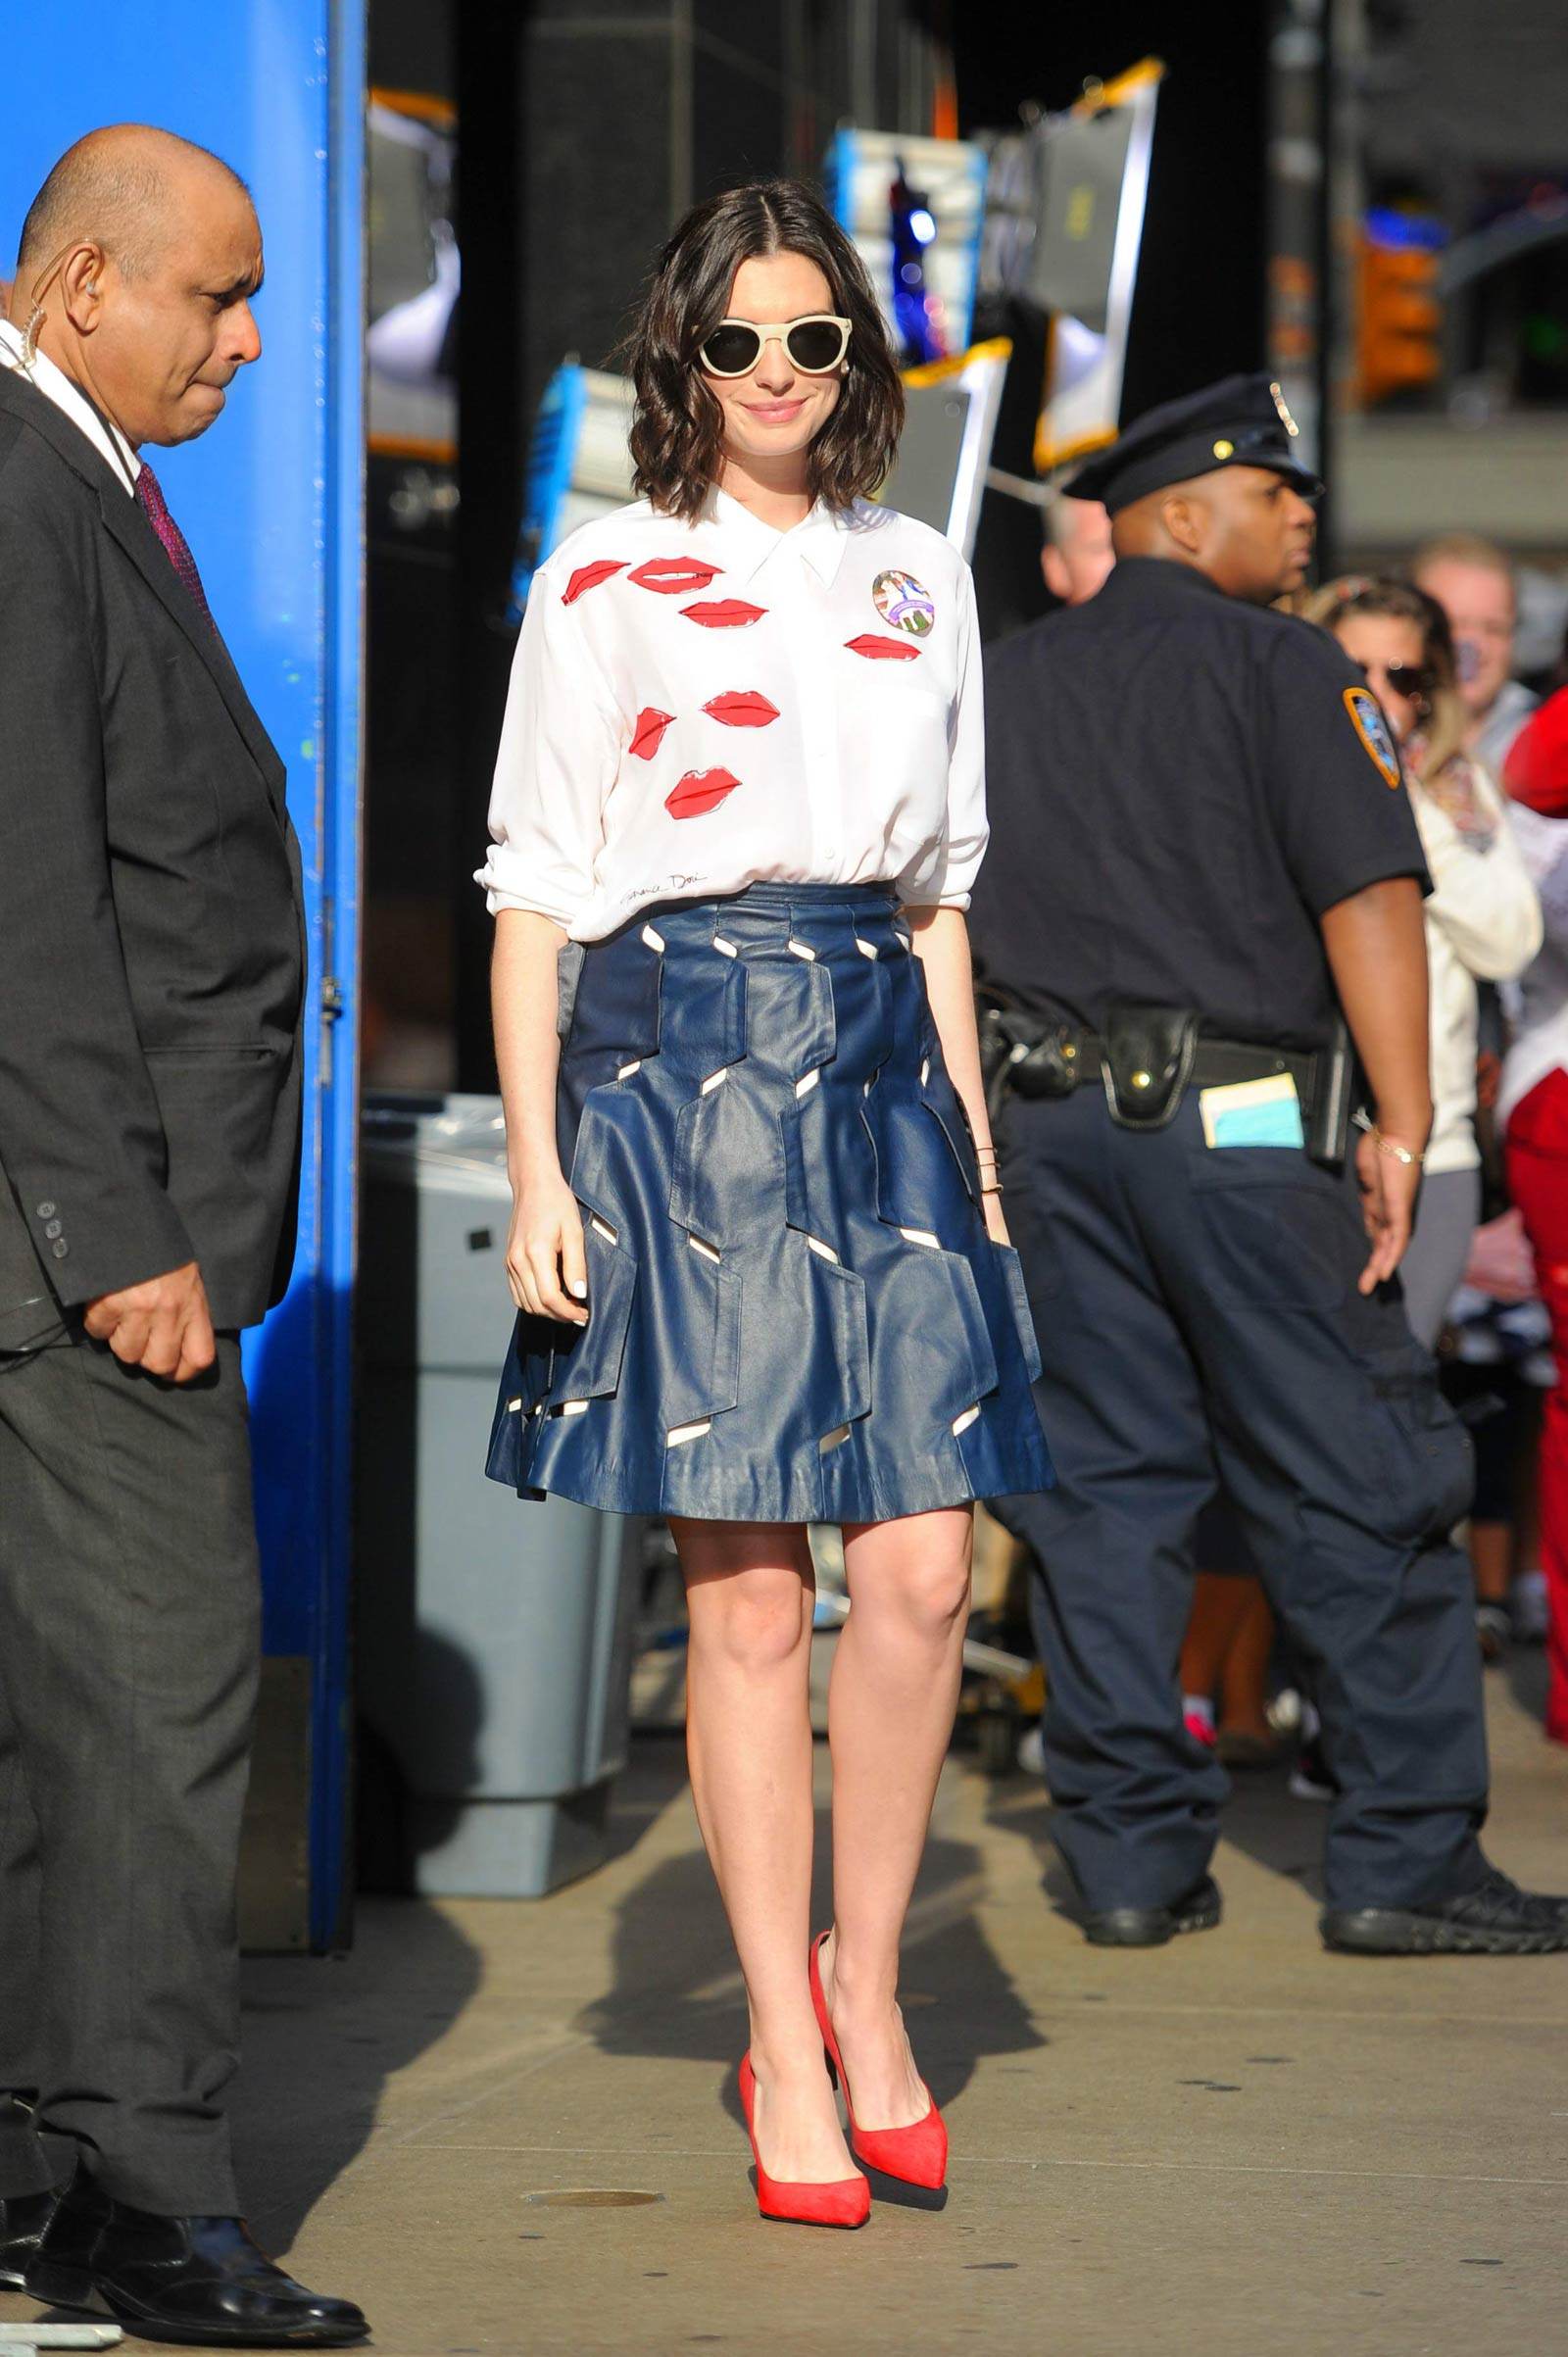 Anne Hathaway at ABC Studios in New York City